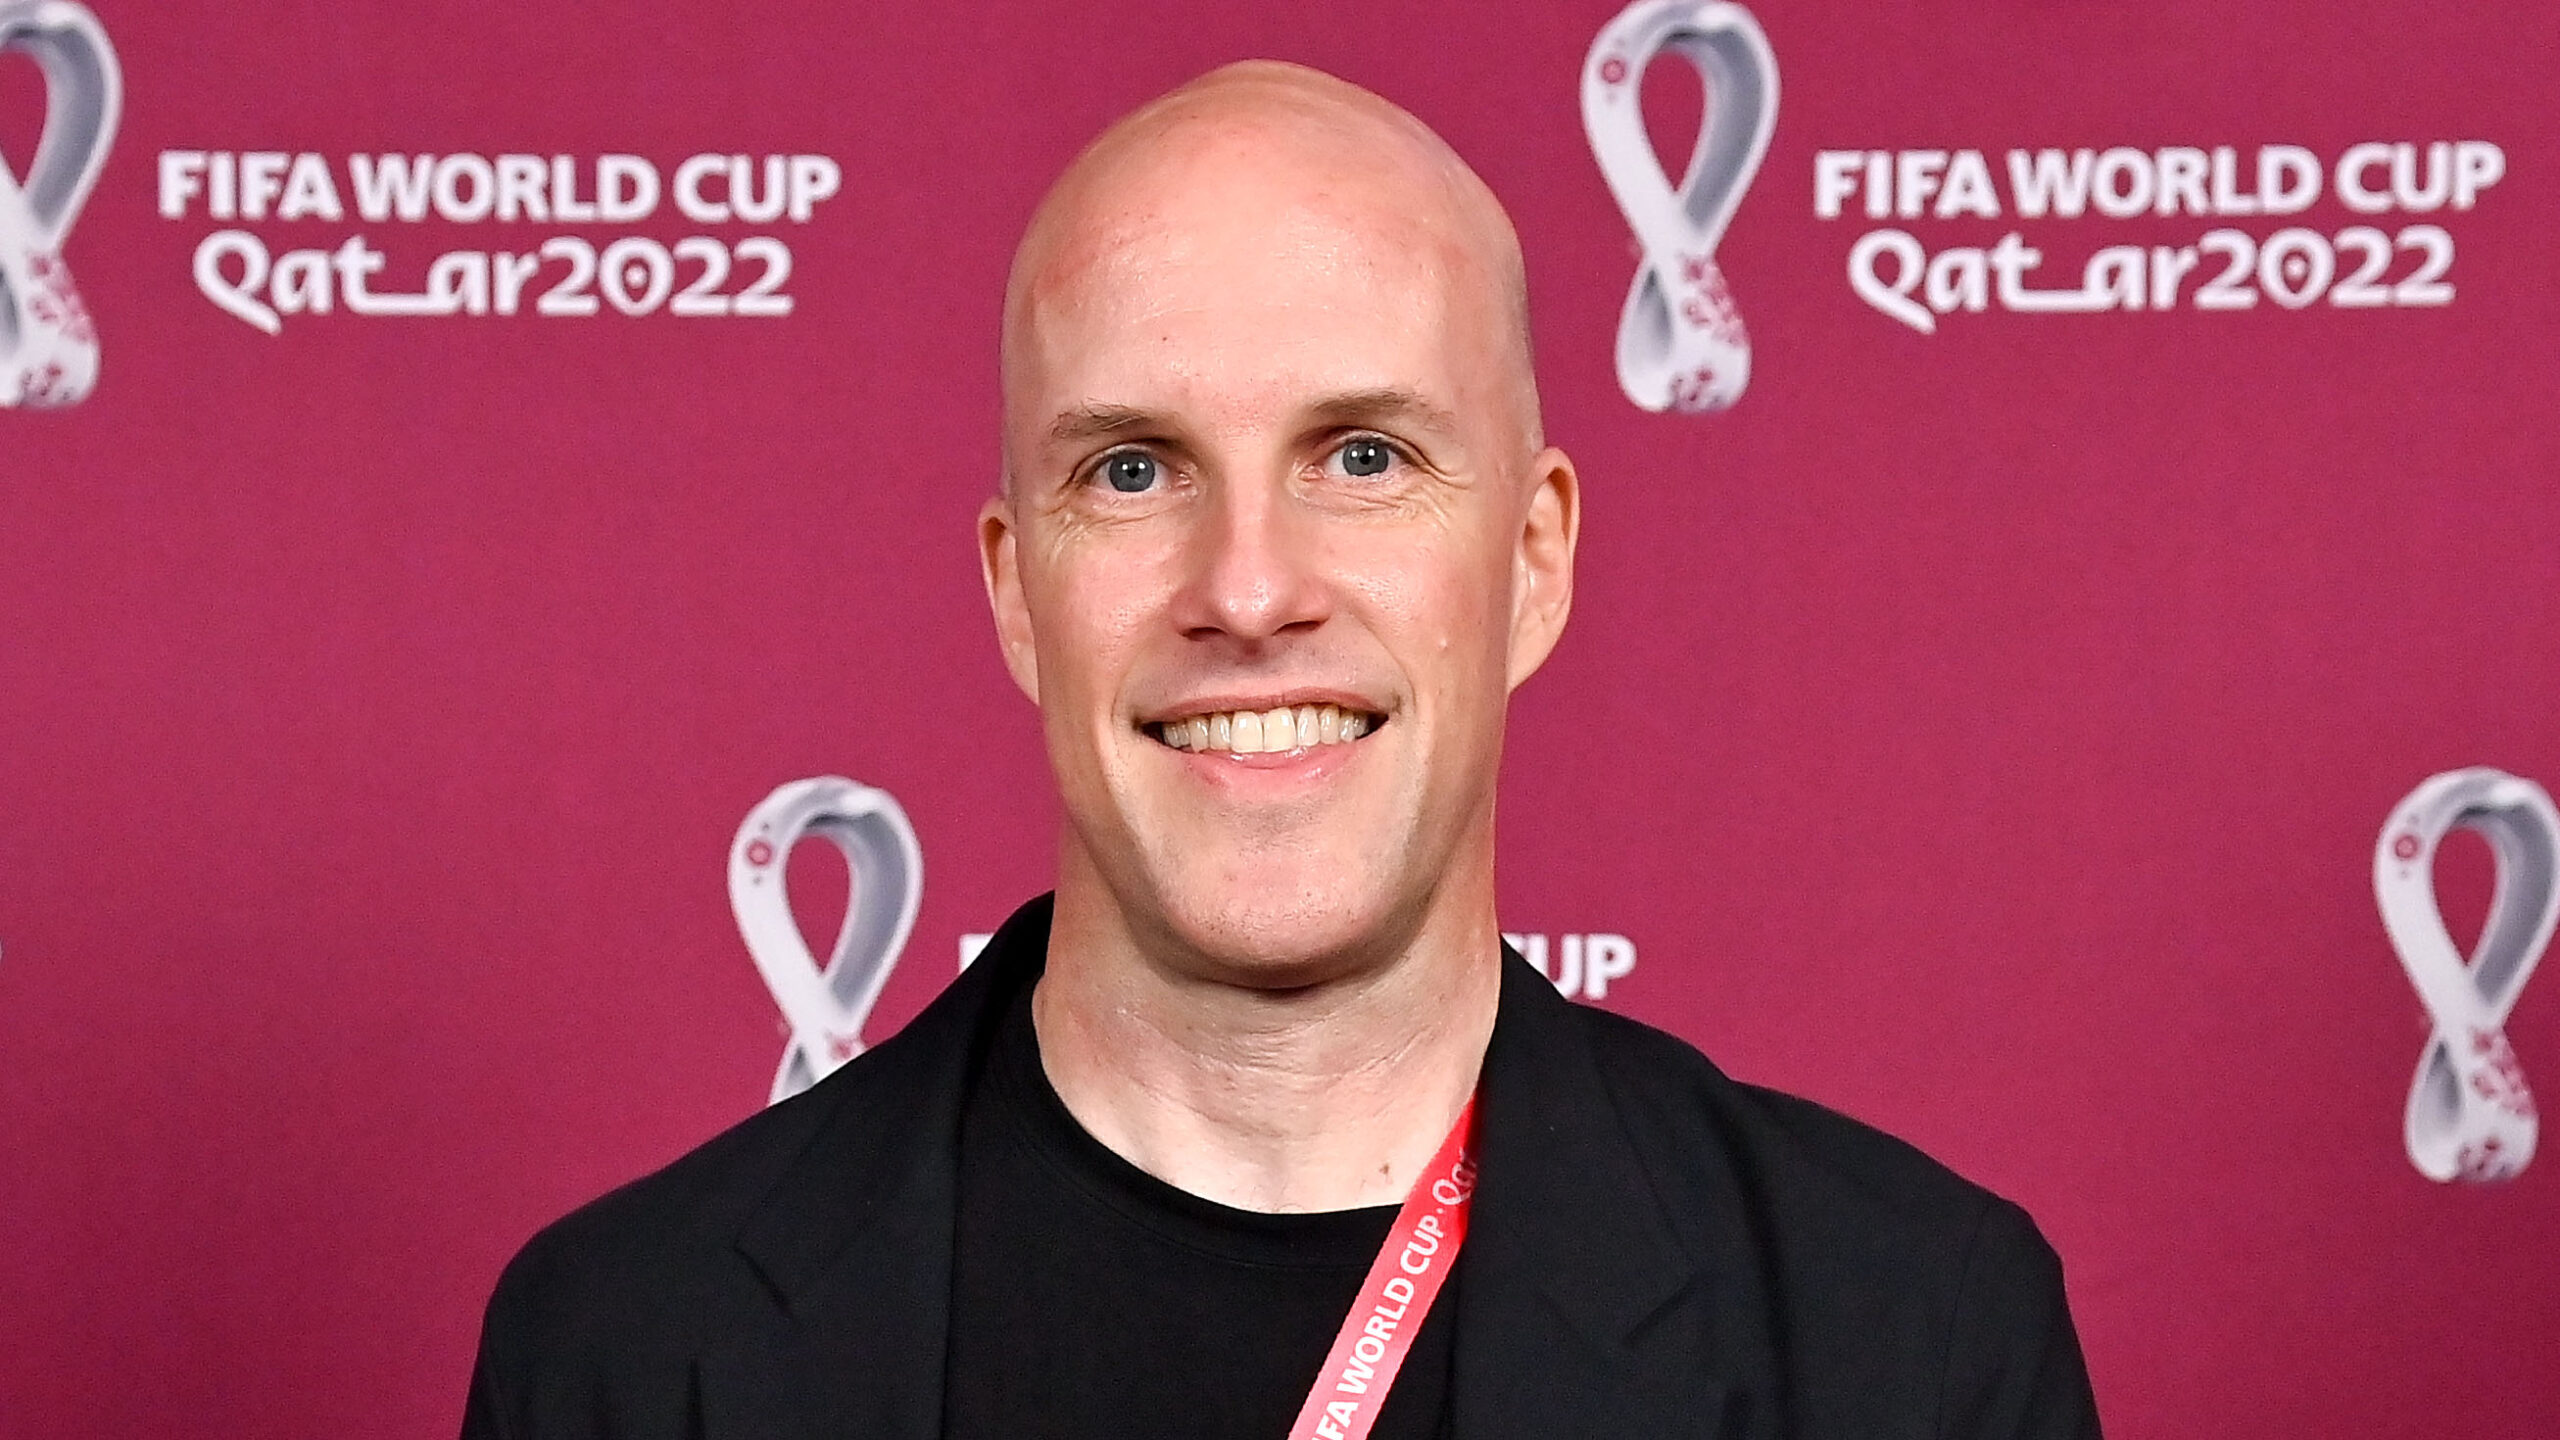 Brother Of U.S. Journalist Grant Wahl, Who Collapsed And Died At World Cup: ‘I Believe He Was Killed’